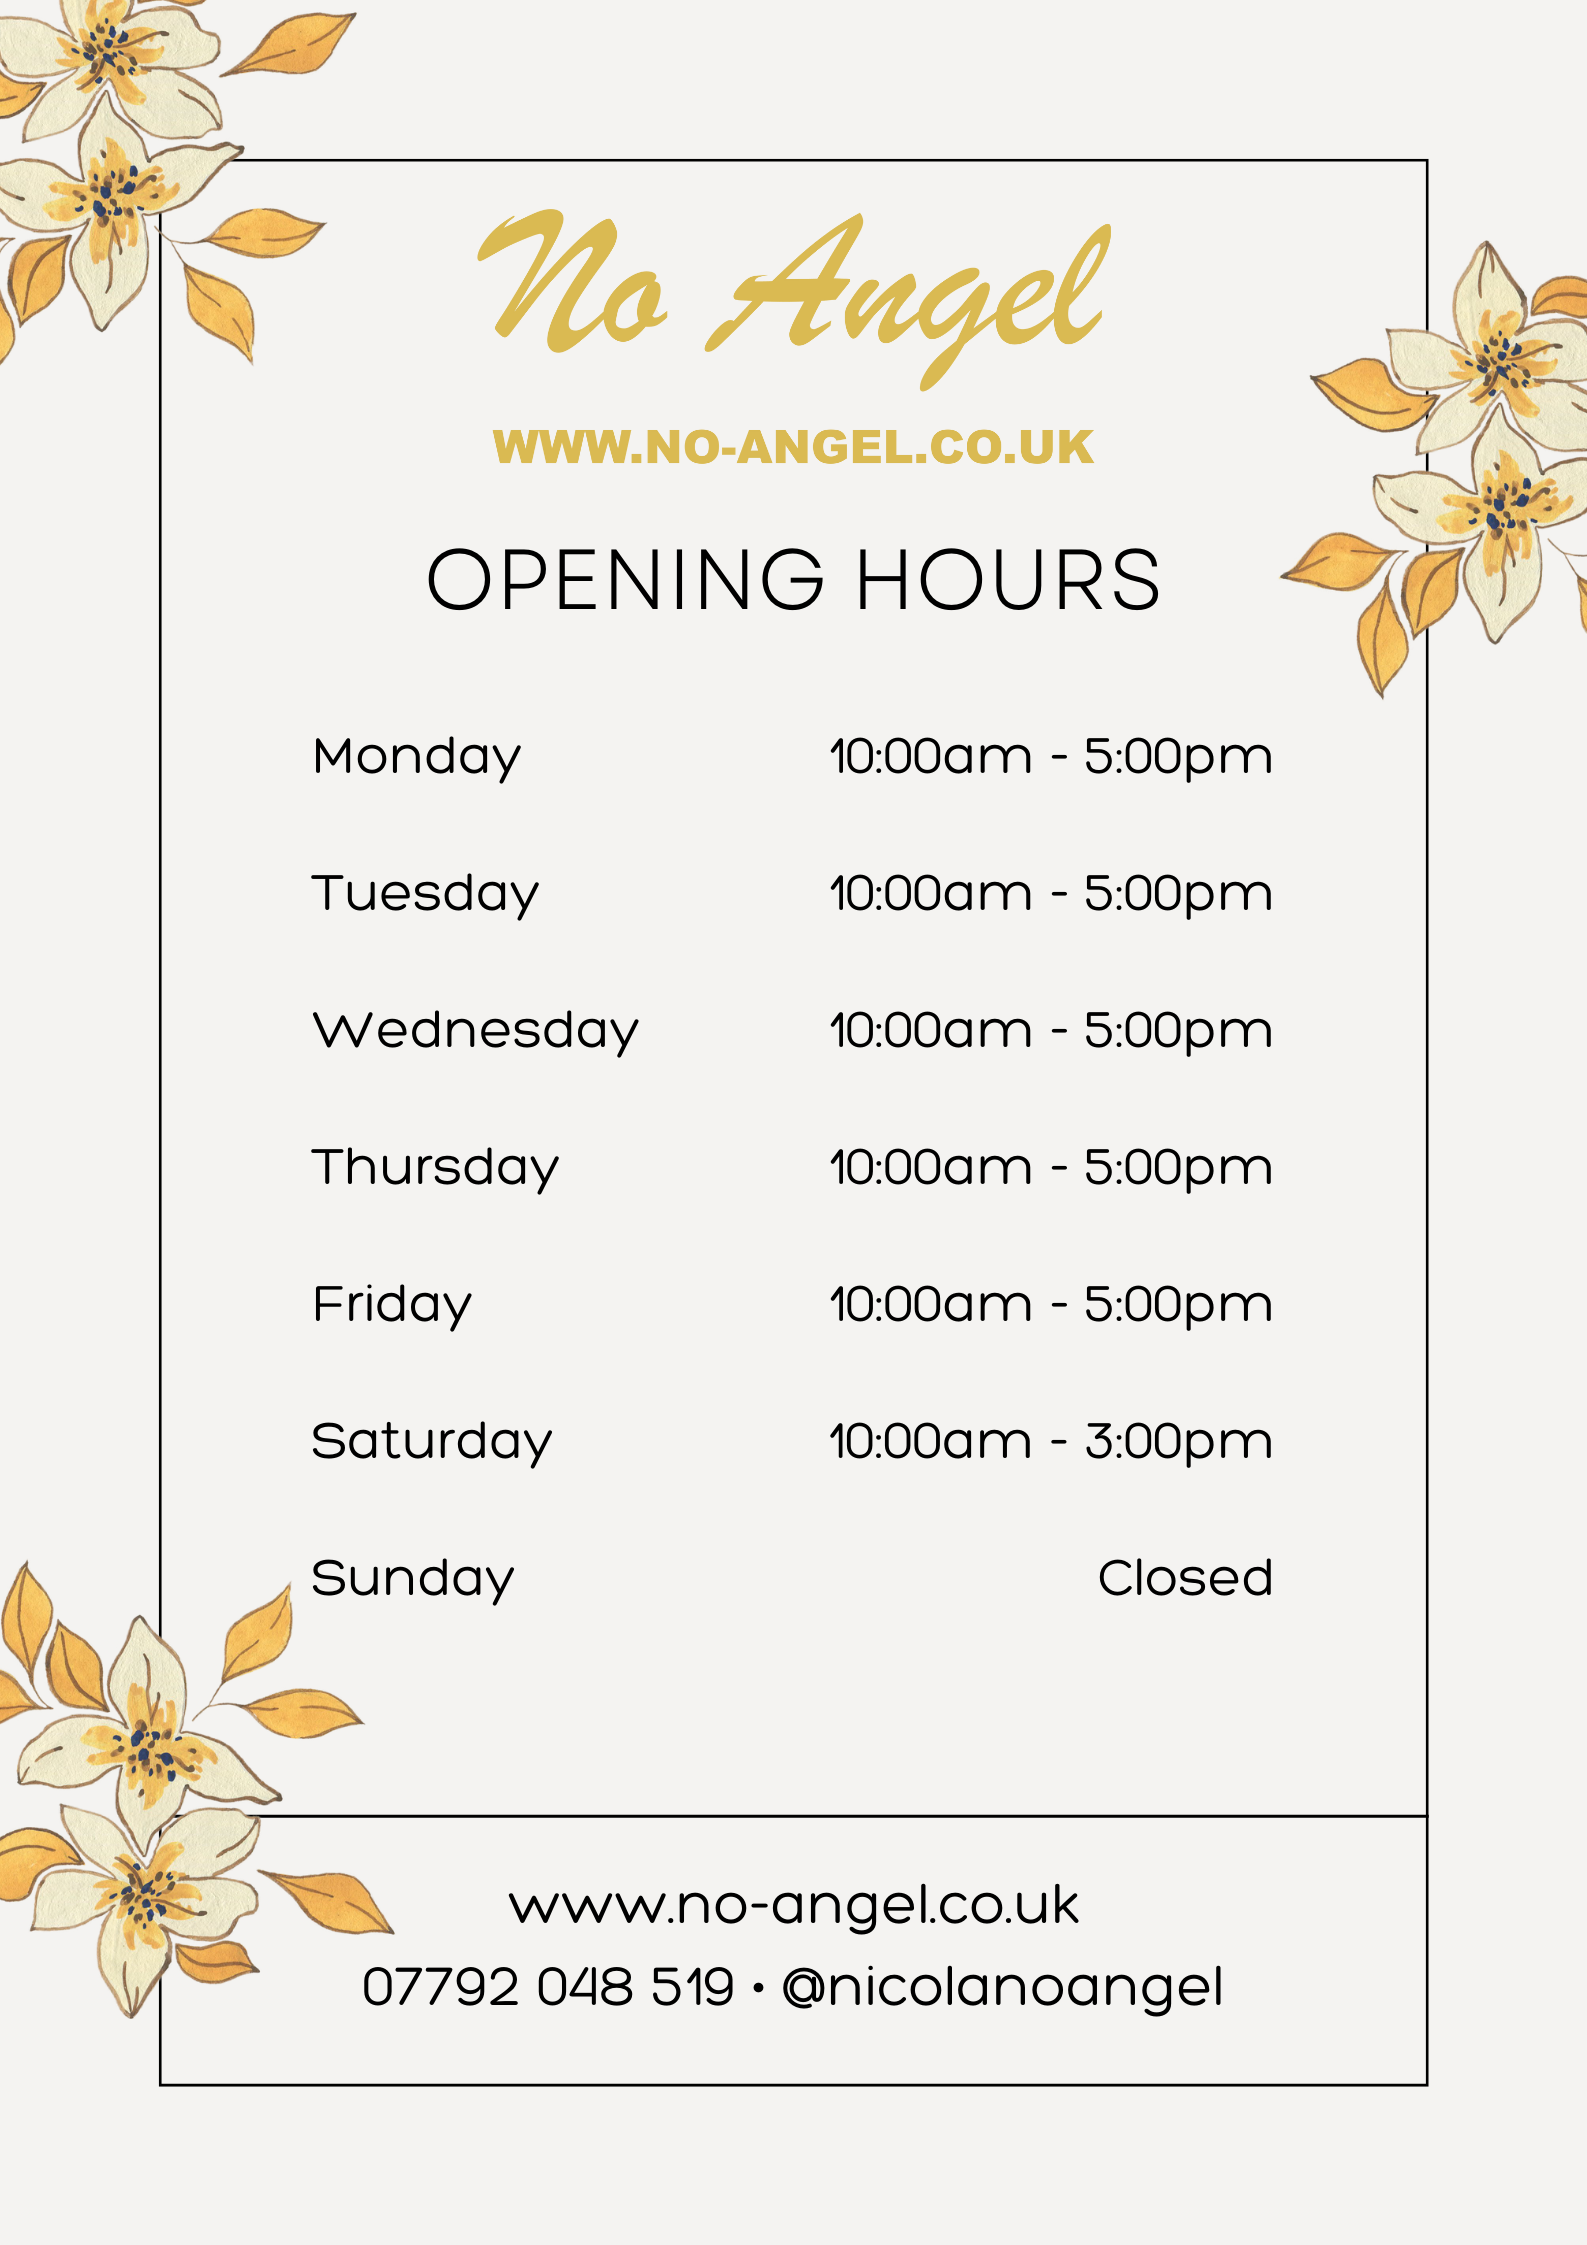  e e VY Angel WWW.NO-ANGEL.CO.UK OPENING HOURS " Monday 10:000m - 5:00pM Tuesday 10:00am - S:00pmM Wednesday 10:00am - S:00pmM Thursday 10:00am - S:00pmM Friday 10:000m - 5:00pM Saturday 10:00am - 3:00pm Sunday Closed A O www.no-angelco.uk 07792 048 519 - @nicolanoangel 